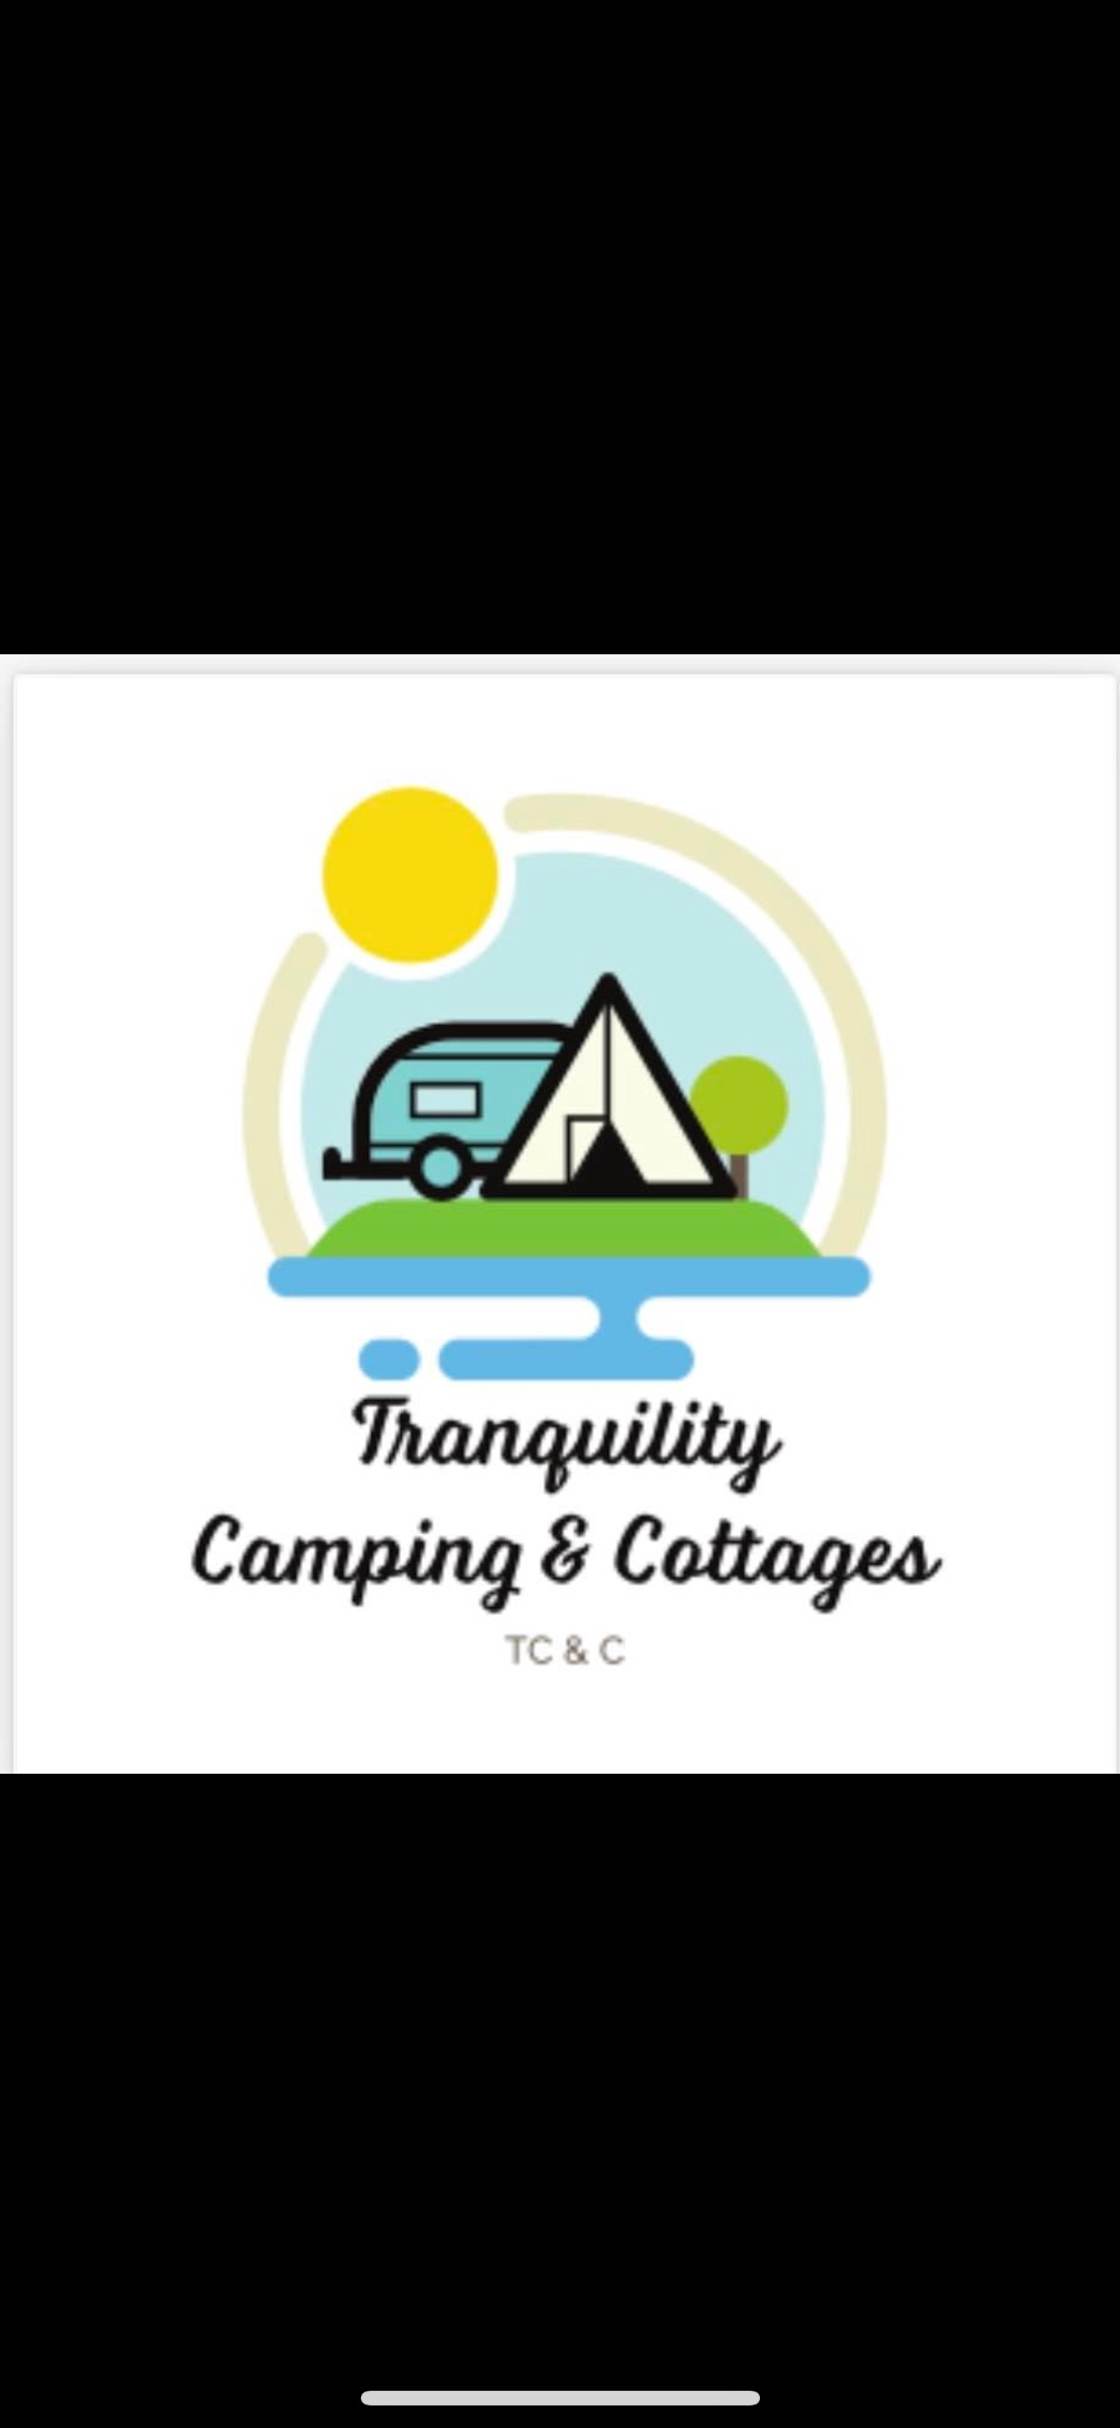 Tranquility Camping & Cottages. 
